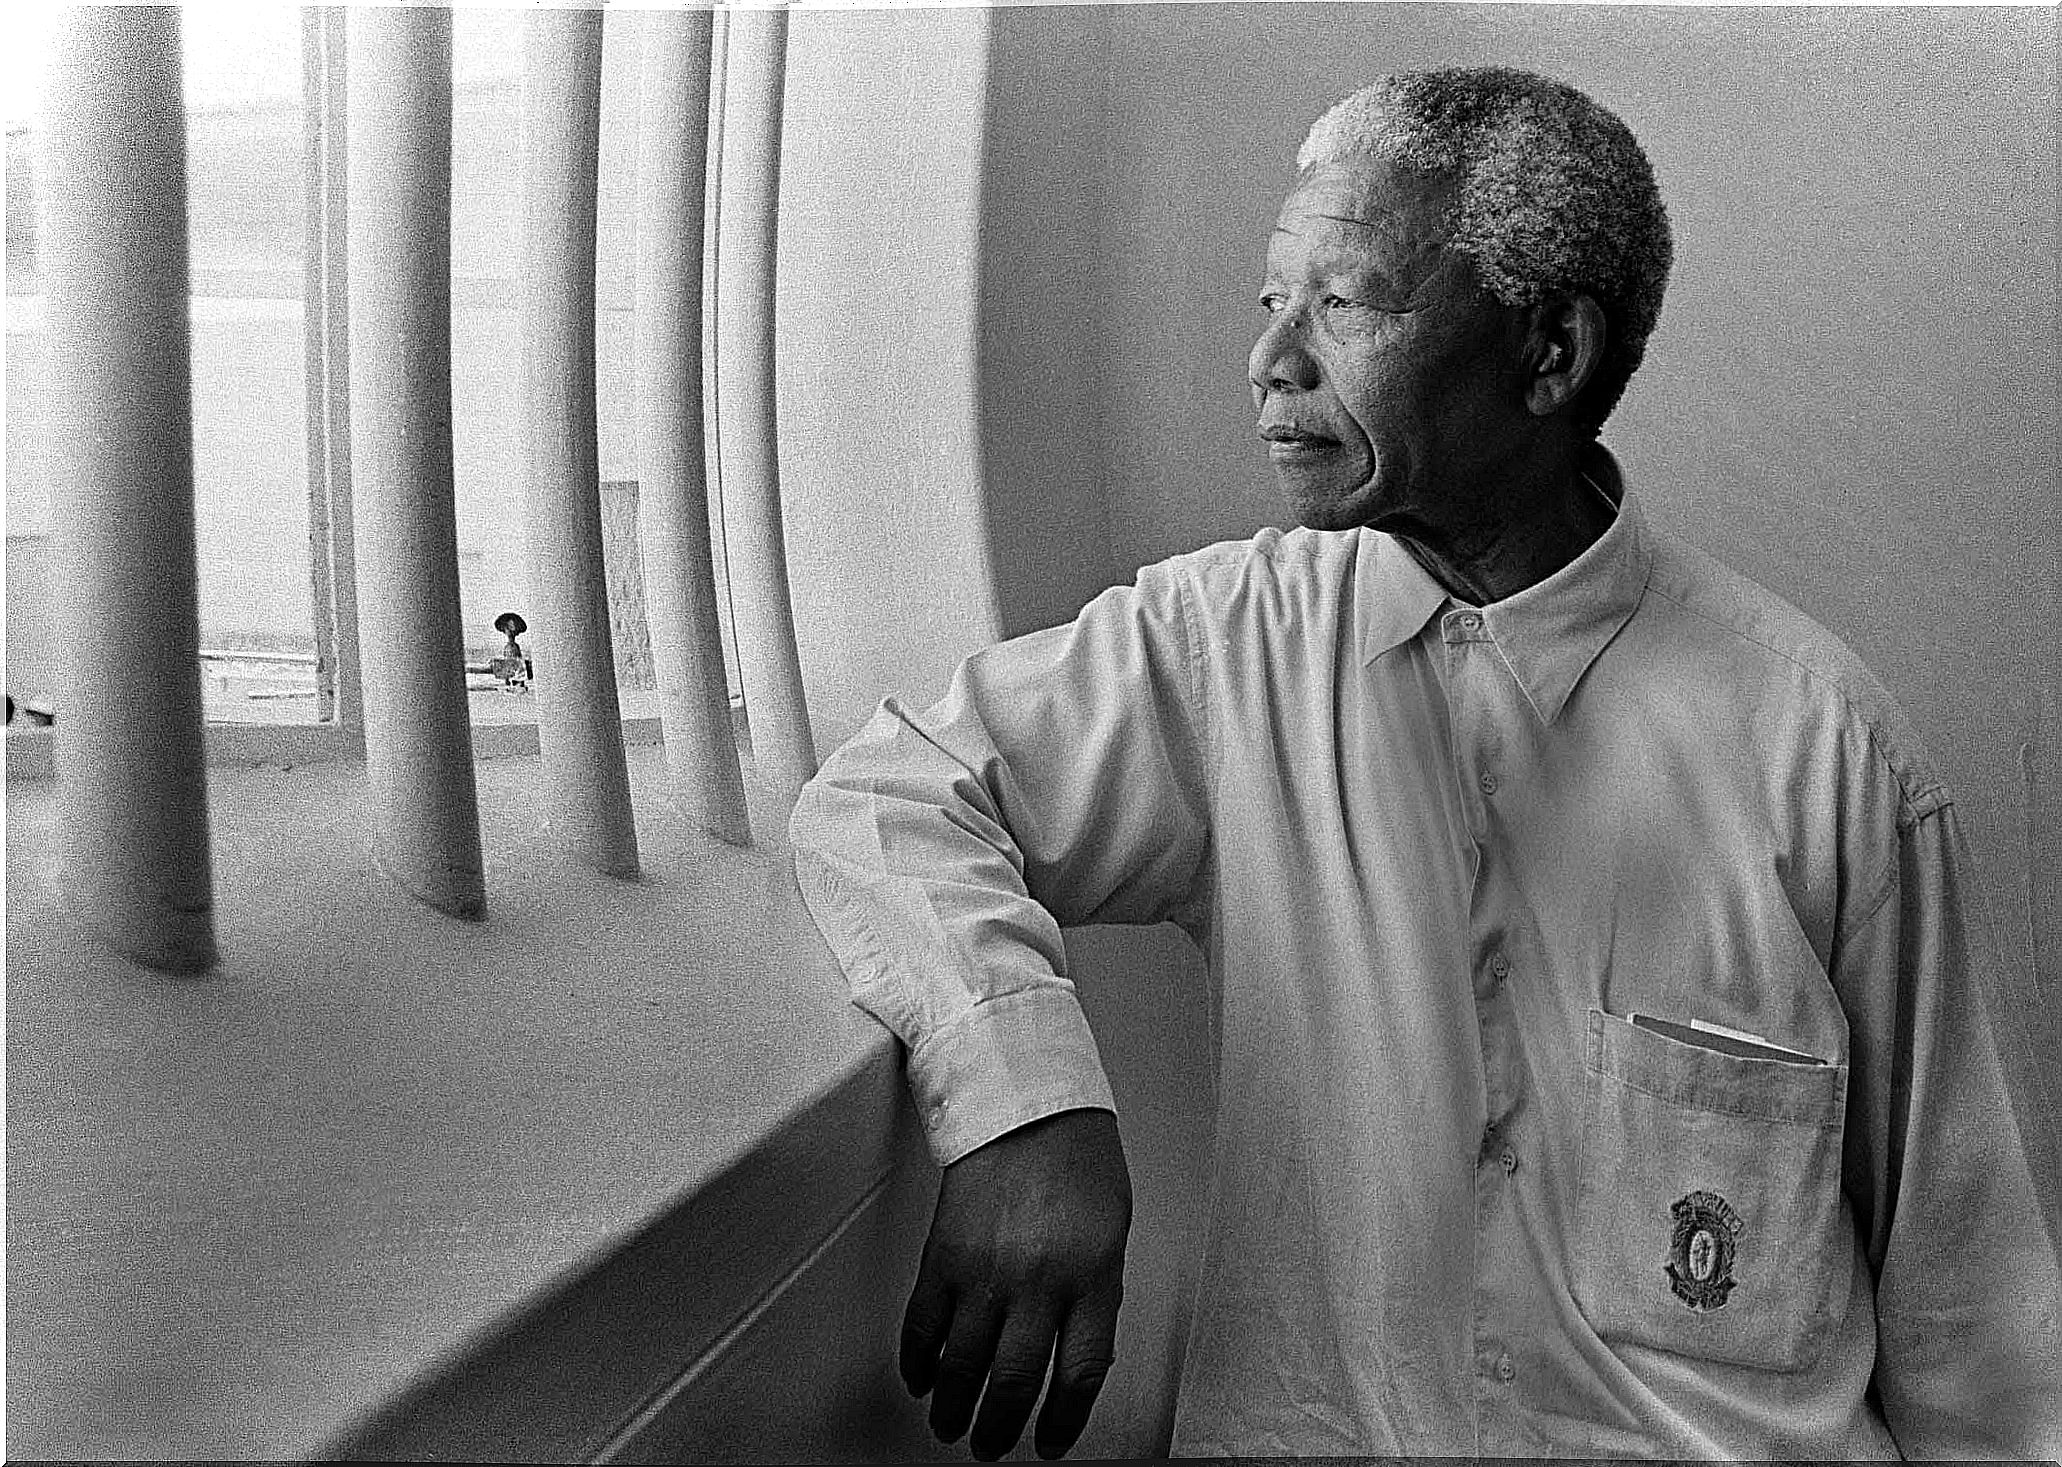 The phrases of Nelson Mandela that have inspired humanity